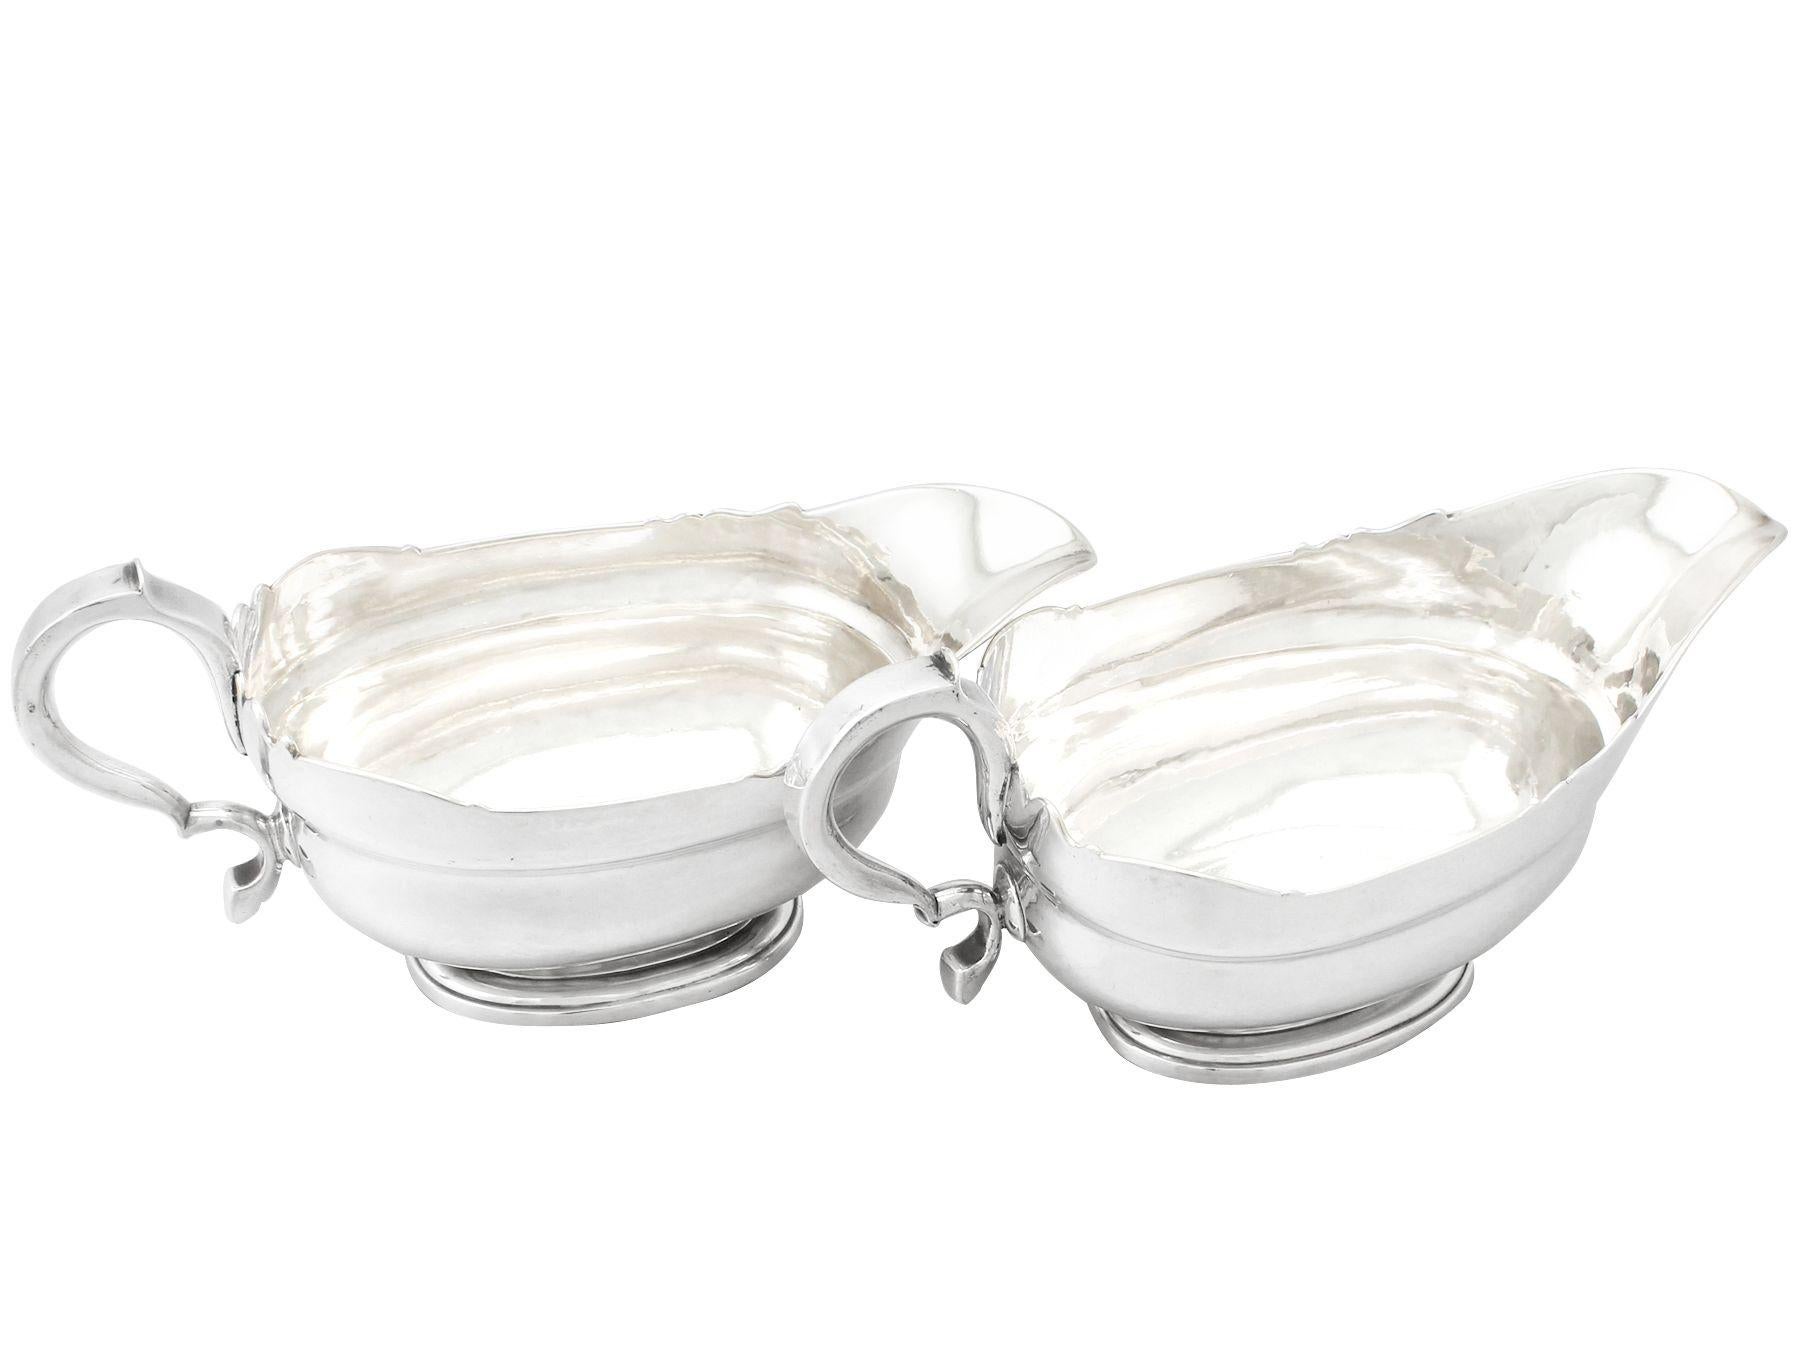 An exceptional, fine and impressive, rare pair of antique George II Newcastle sterling silver sauceboats made by Isaac Cookson, an addition to our Georgian dining silverware collection.

These exceptional and rare antique George II sterling silver